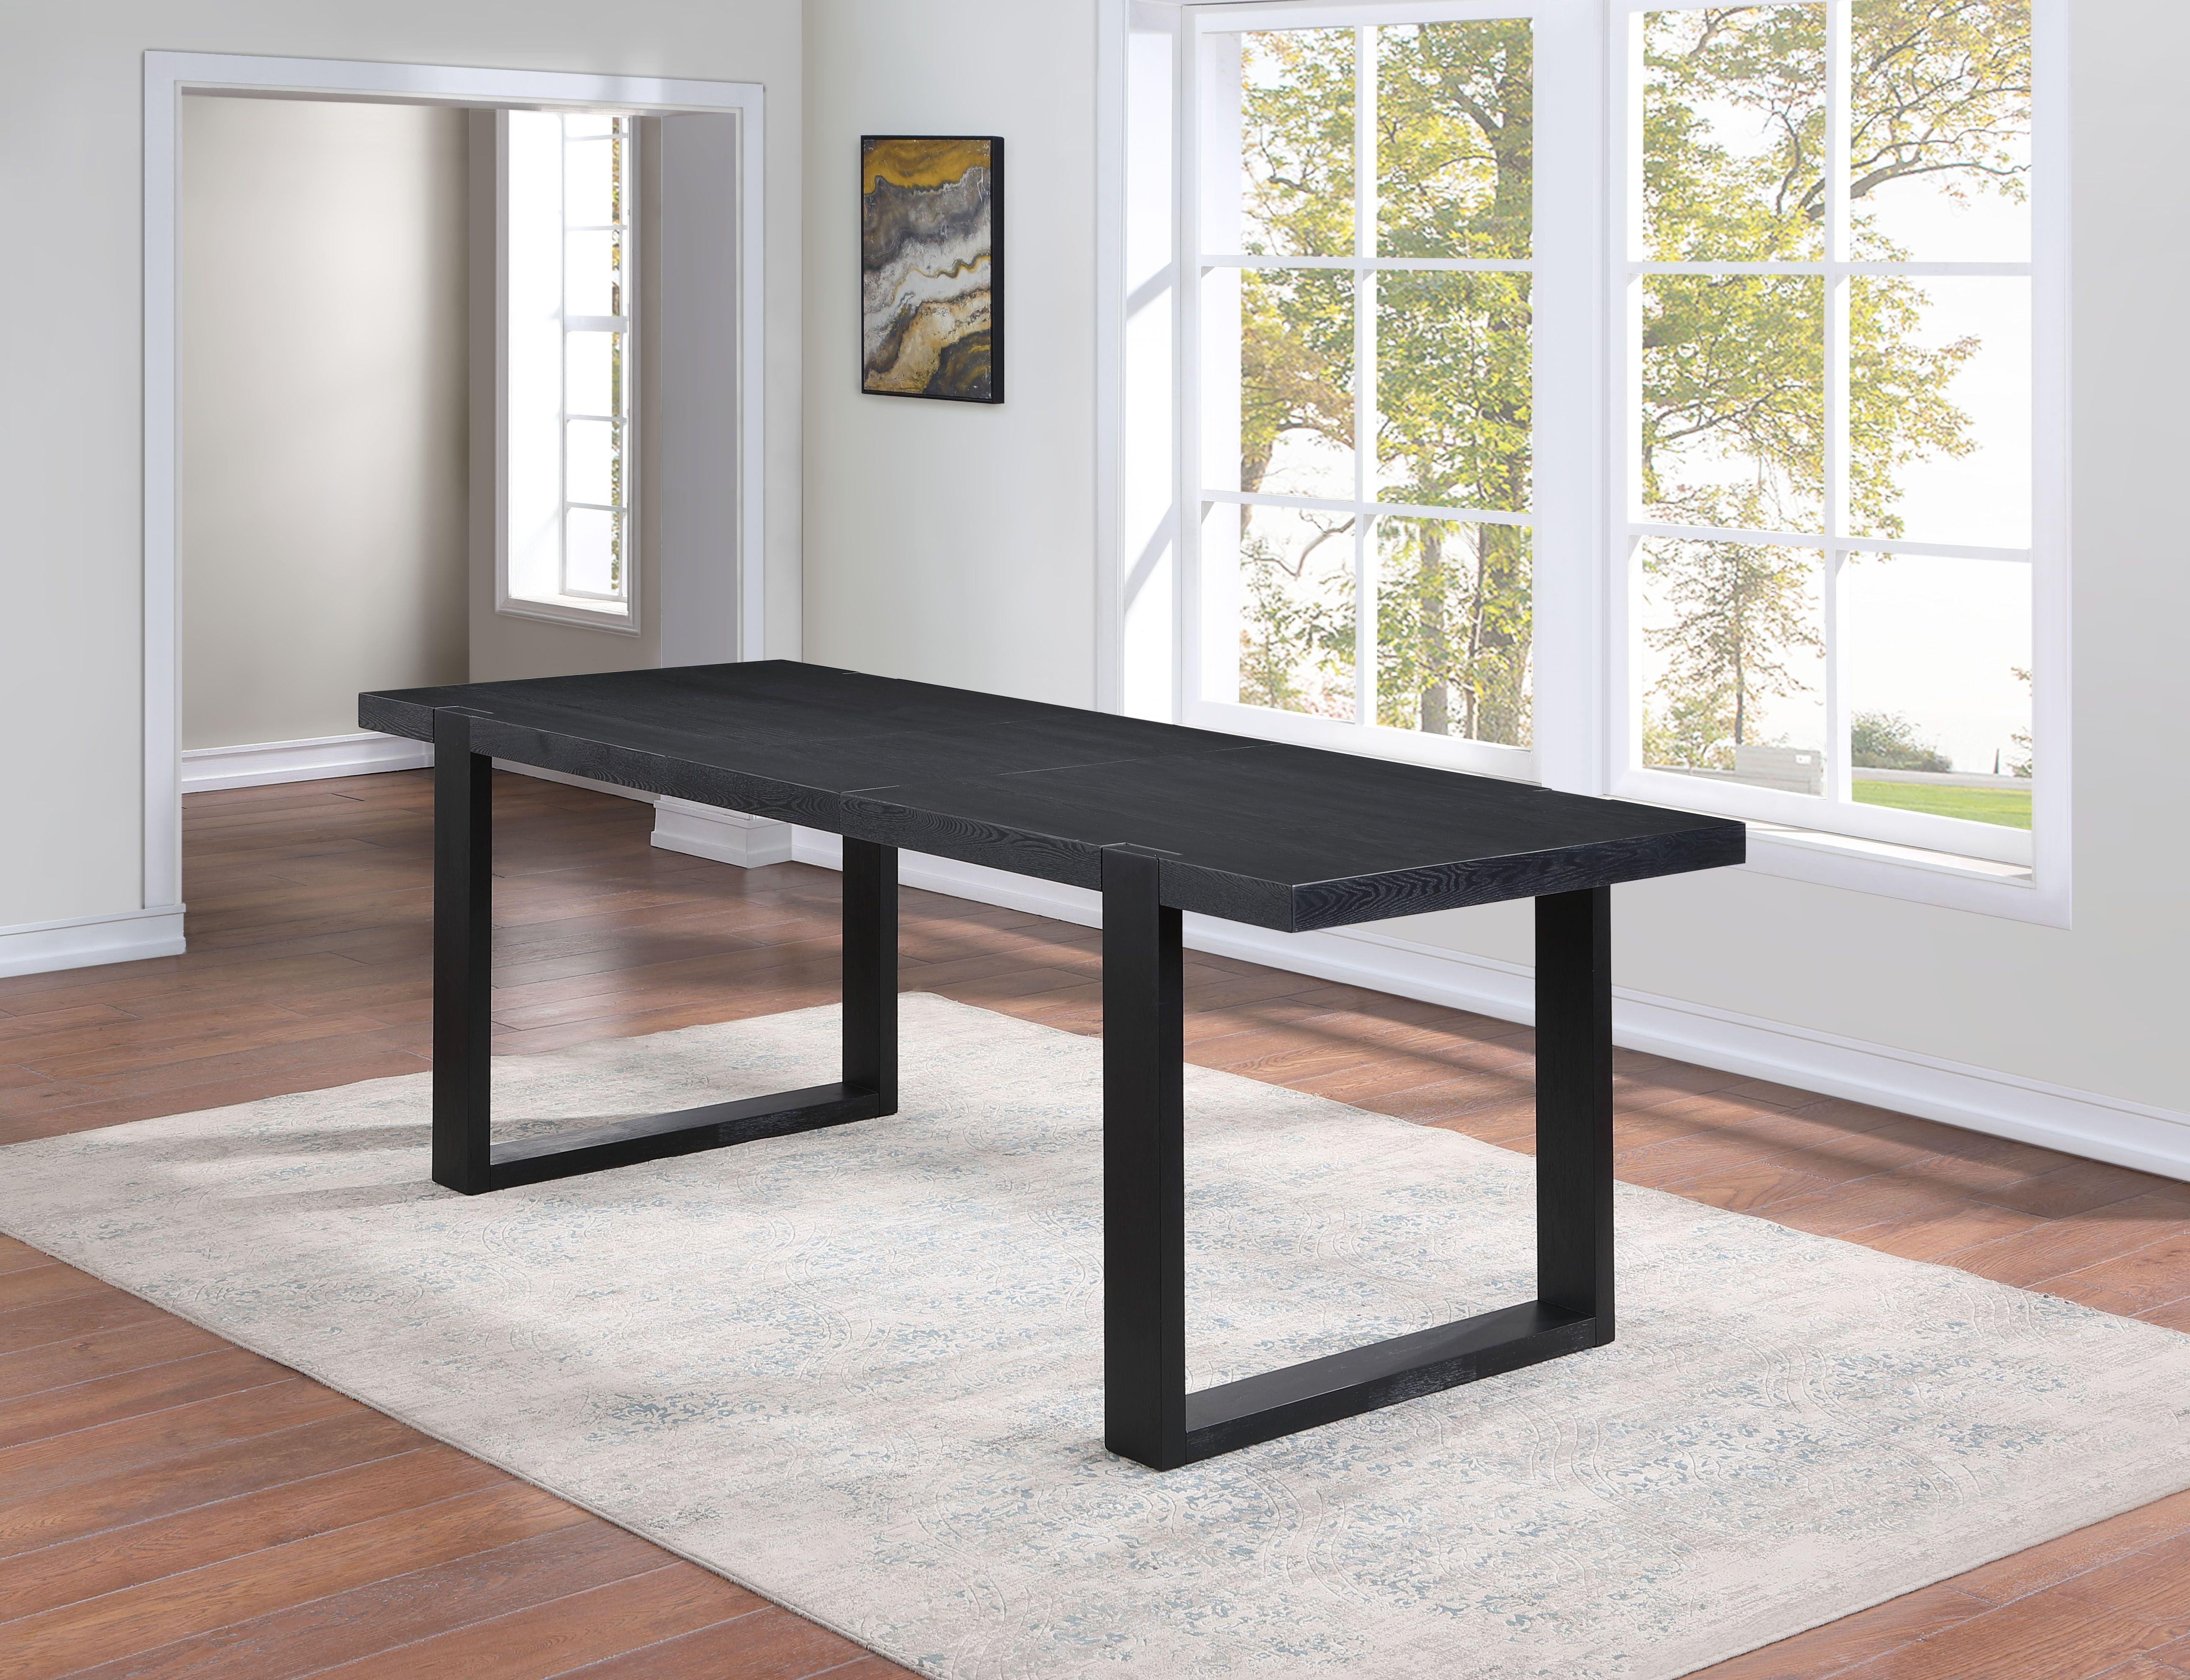 Steve Silver Furniture - Yves - Counter Table - Black - 5th Avenue Furniture